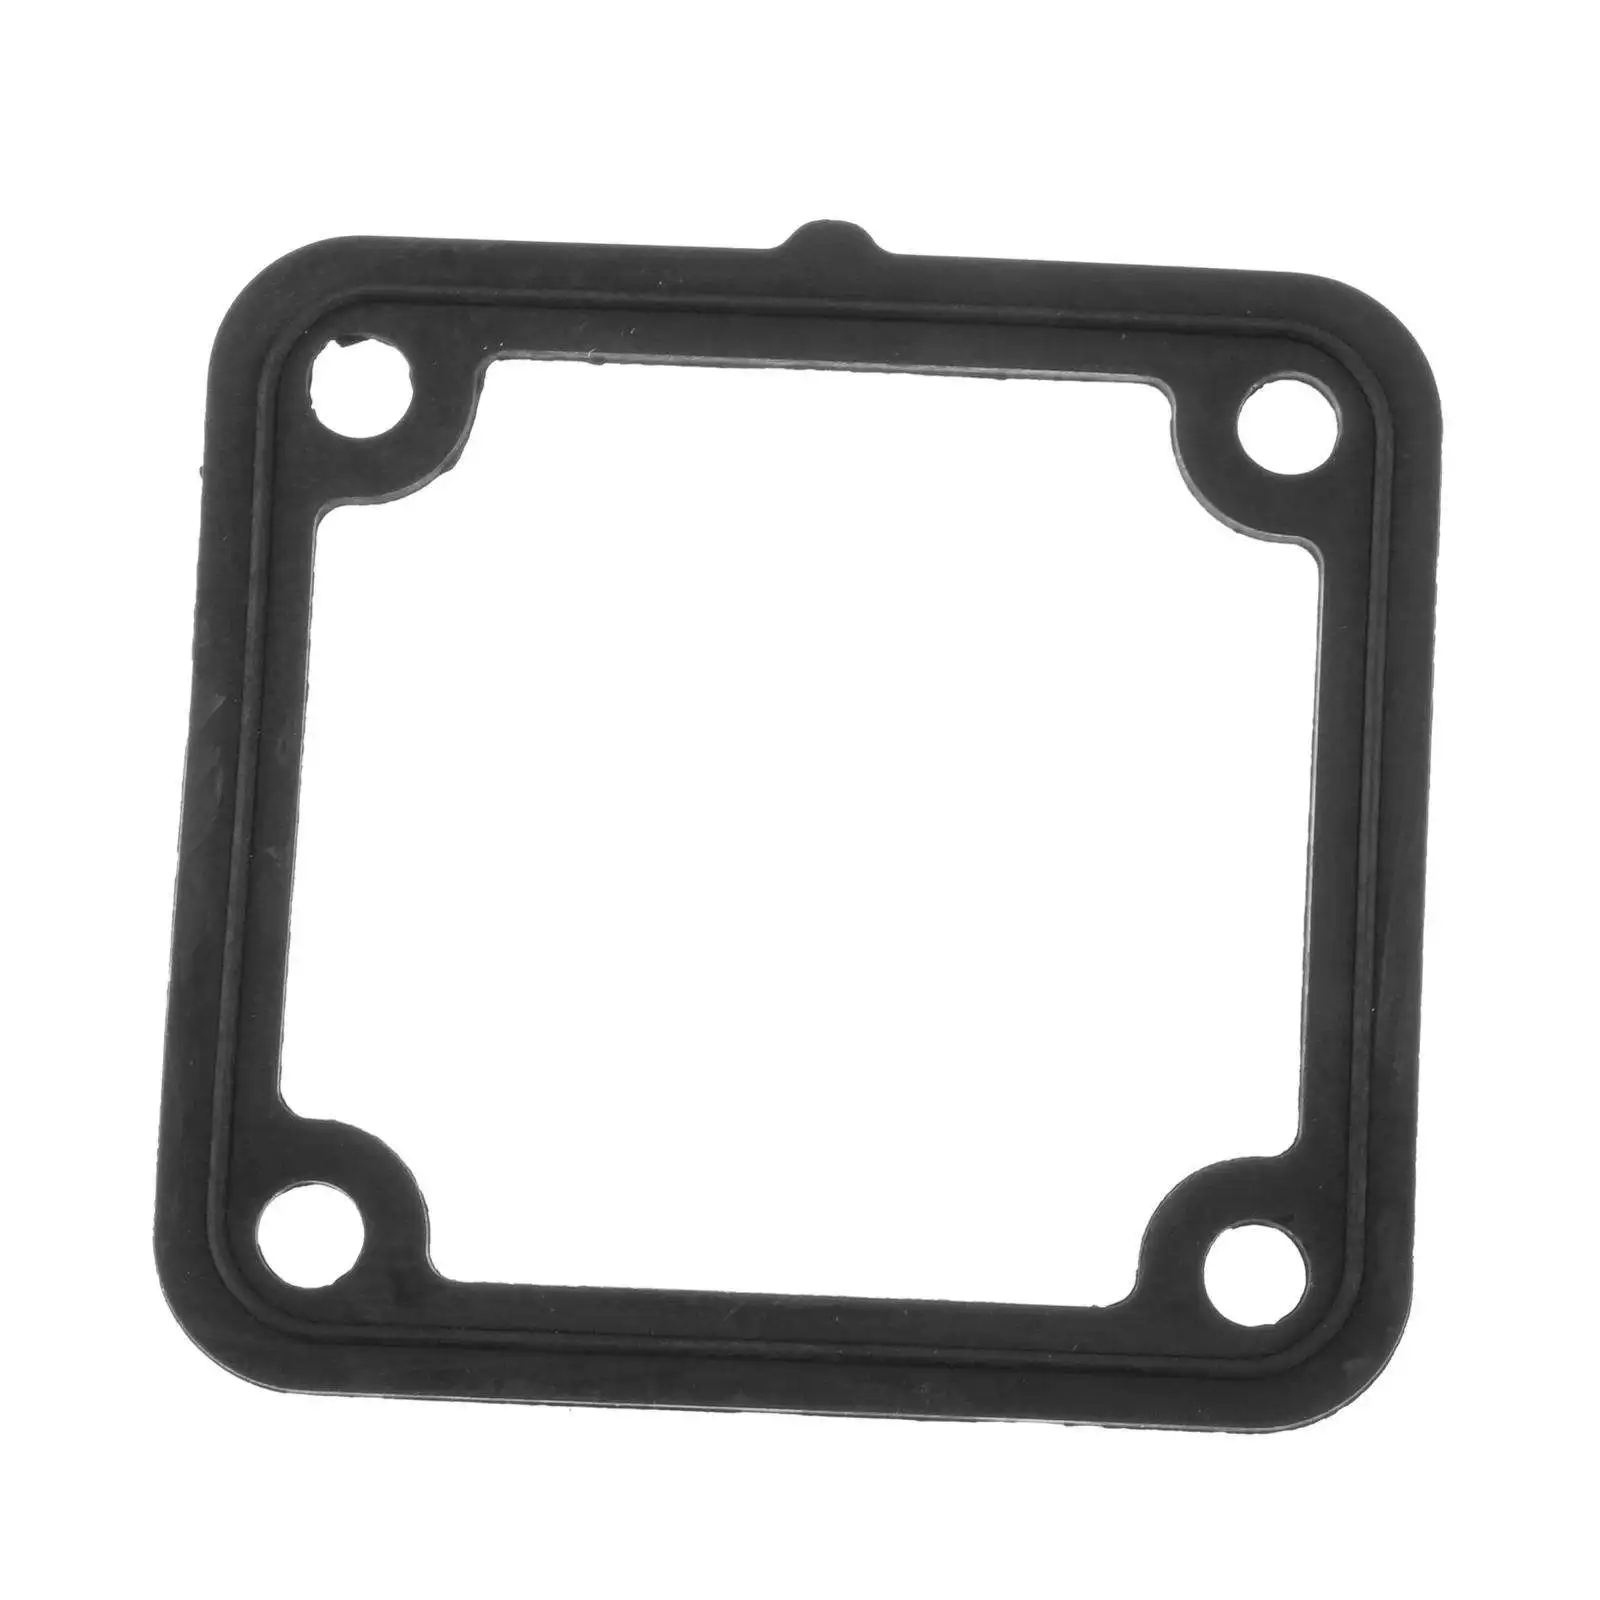 6Y1242680000 Fuel Meter Gasket Outboard Components Accessories Parts 6Y1-24268-00-00 Replace for Yamaha